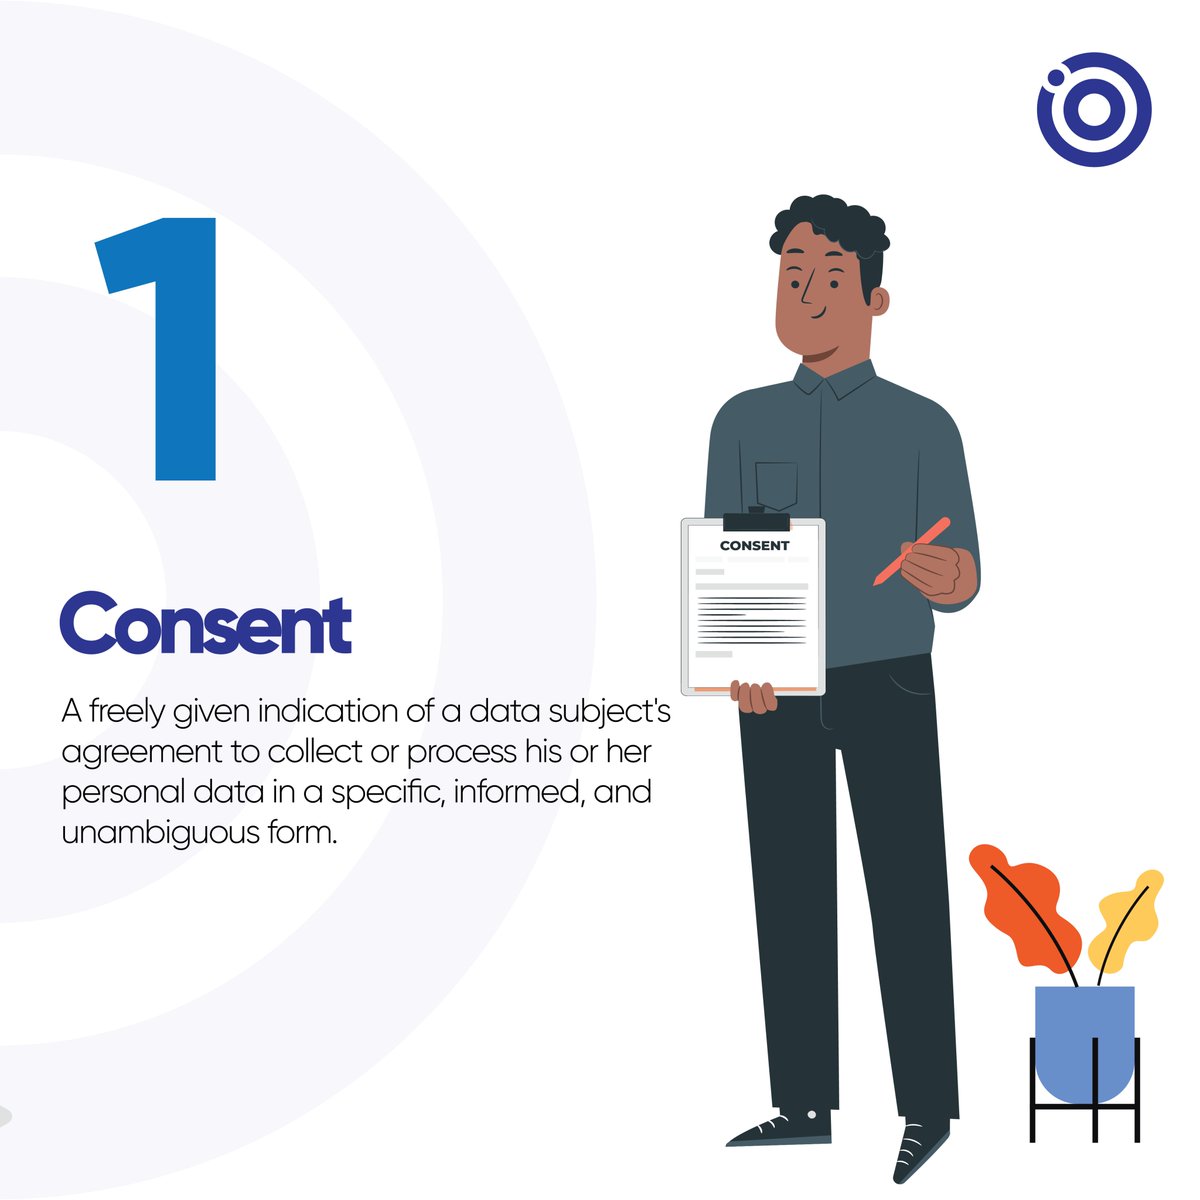 Respecting the data subject’s  consent is the cornerstone of ethical data collection.

It's not just a legal requirement; it's a fundamental respect for individual privacy.

Let's prioritize consent in the digital age!
📊🔒 #DataPrivacy
#ConsentMatters